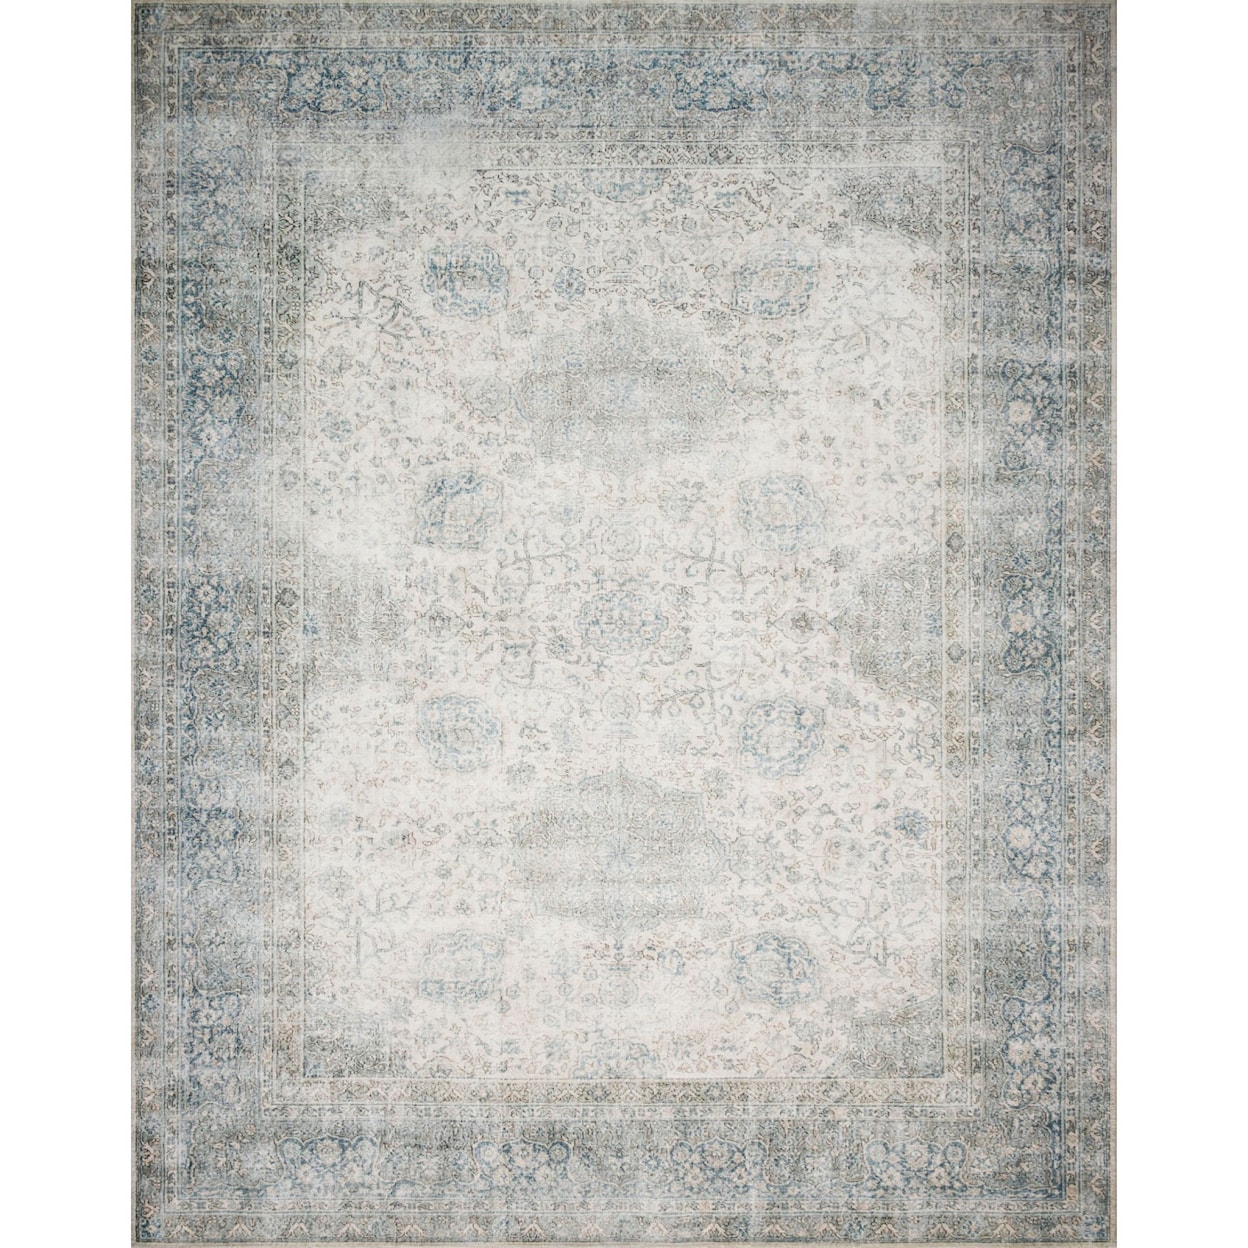 Magnolia Home by Joanna Gaines for Loloi Lucca 1'-6" x 1'-6" Square Rug